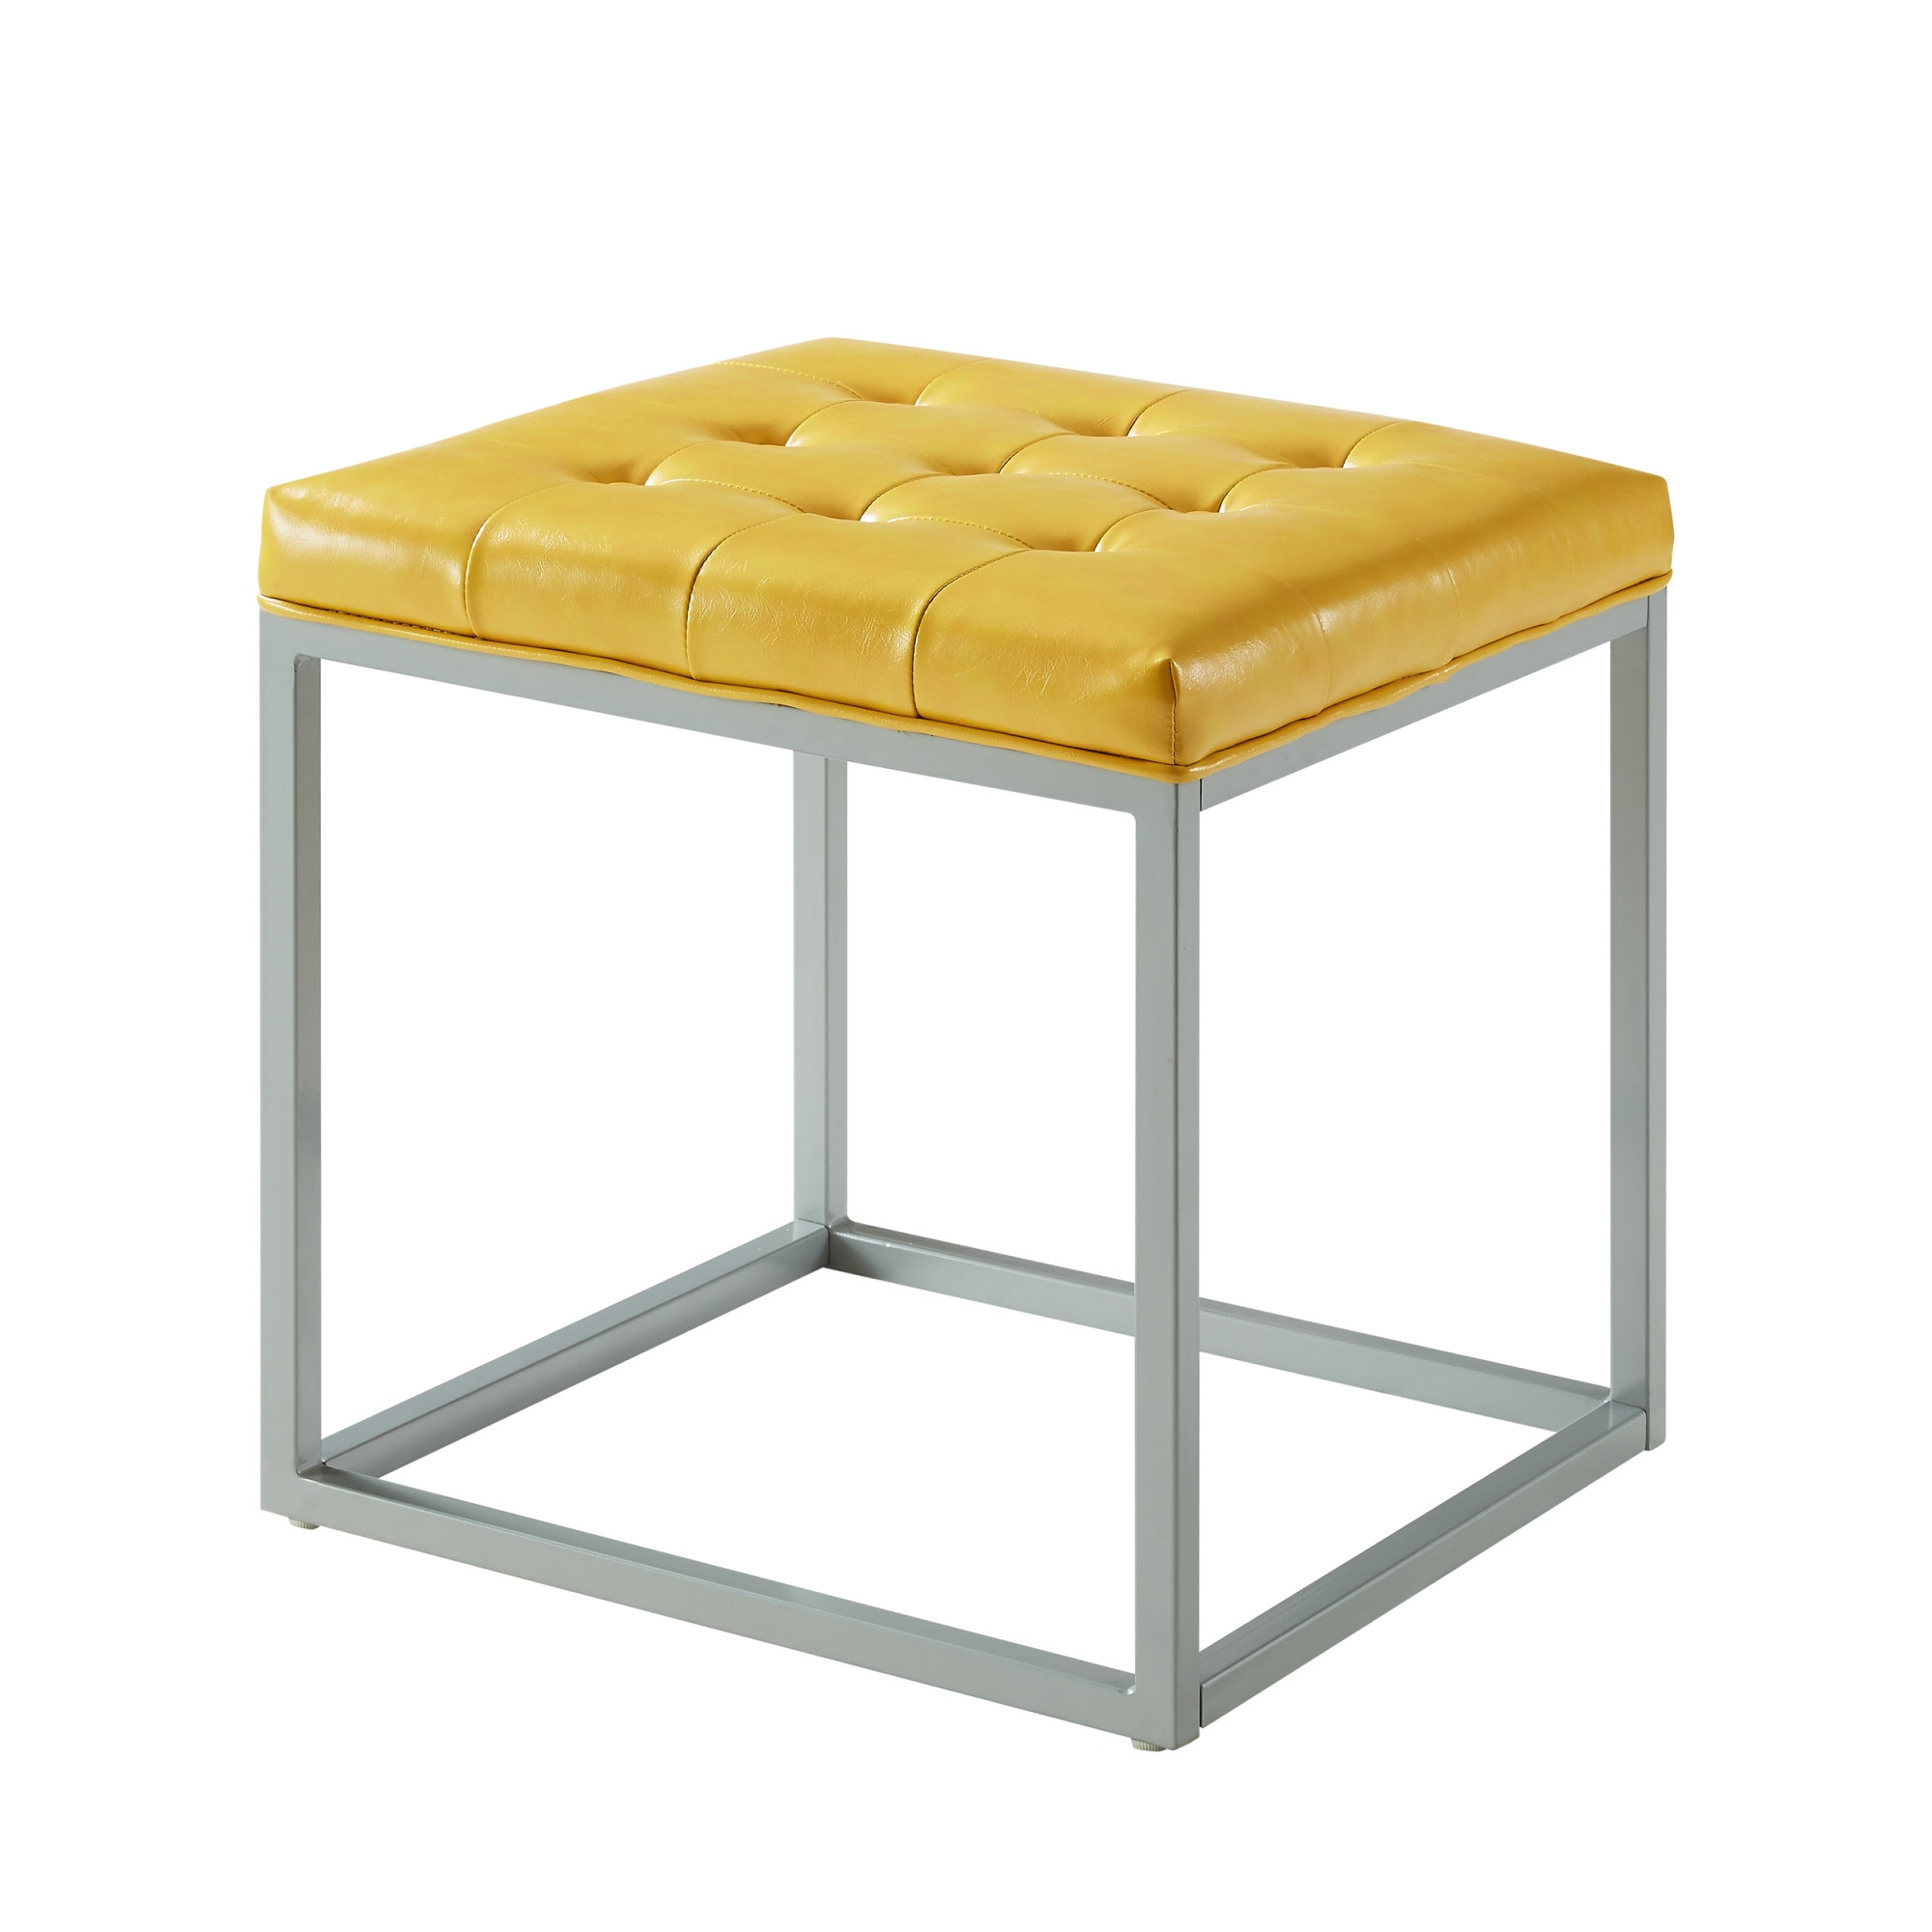 18" Yellow Faux Leather And Gray Cube Ottoman-487775-1